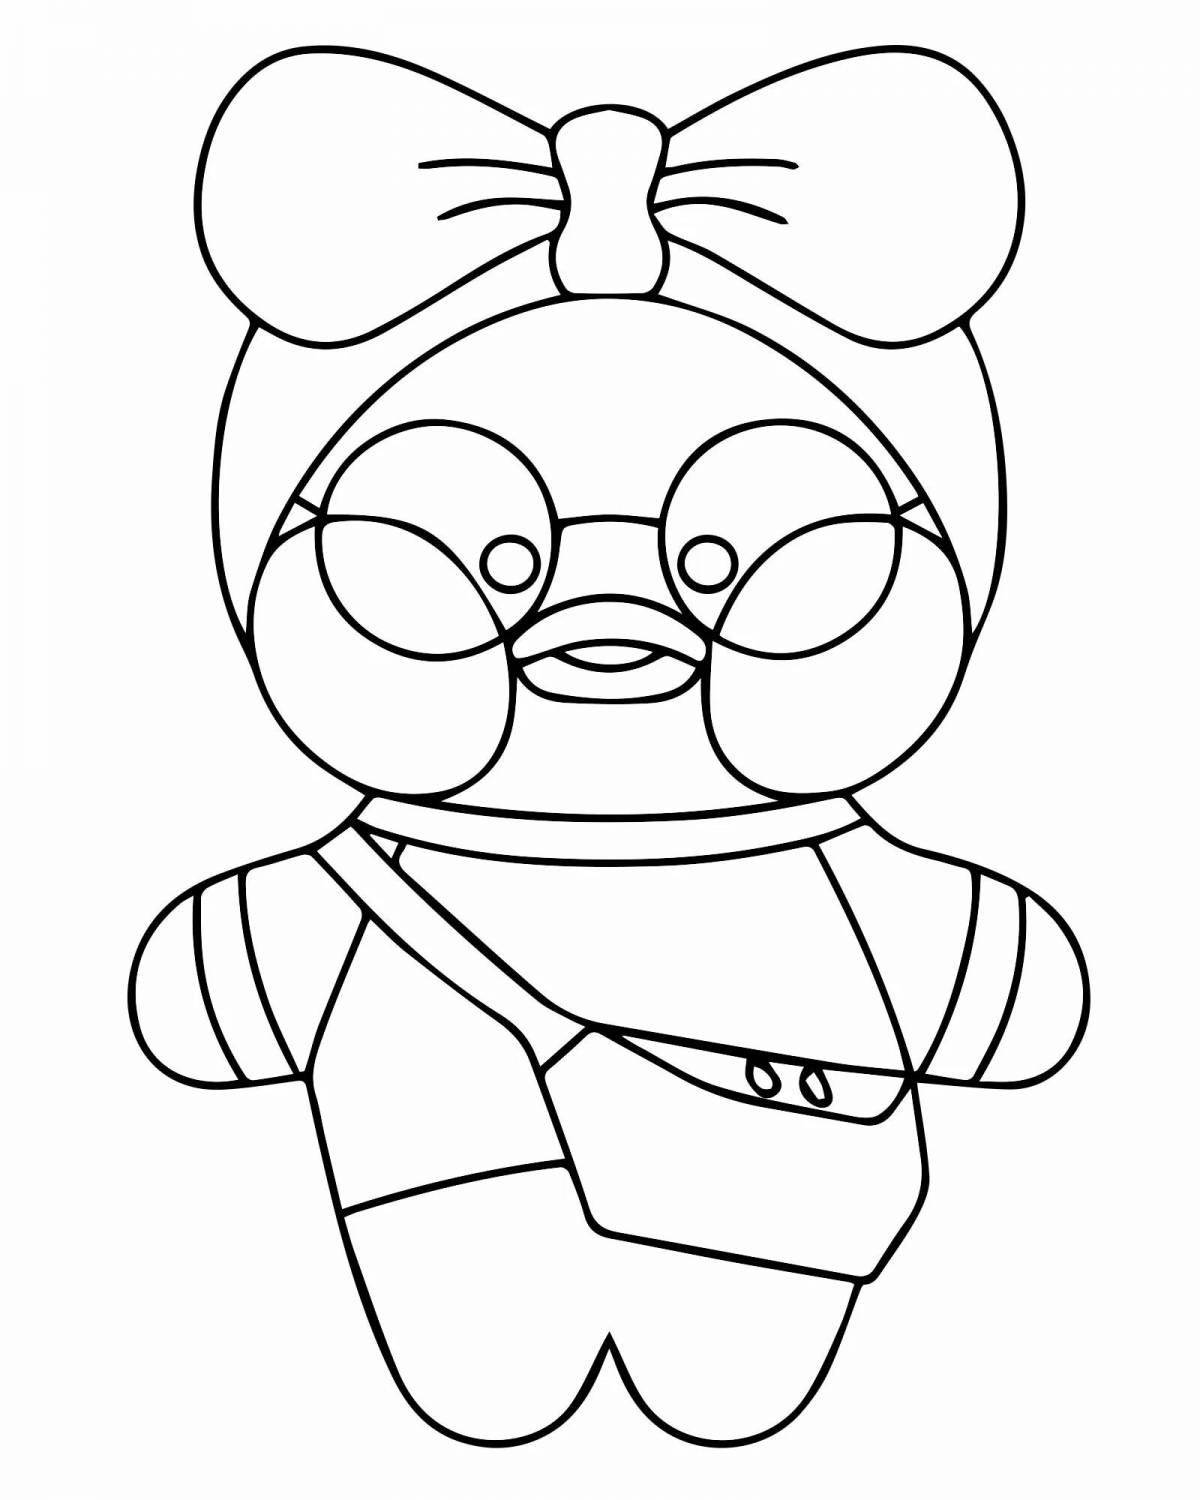 Lalalafanfan exquisite duck coloring page